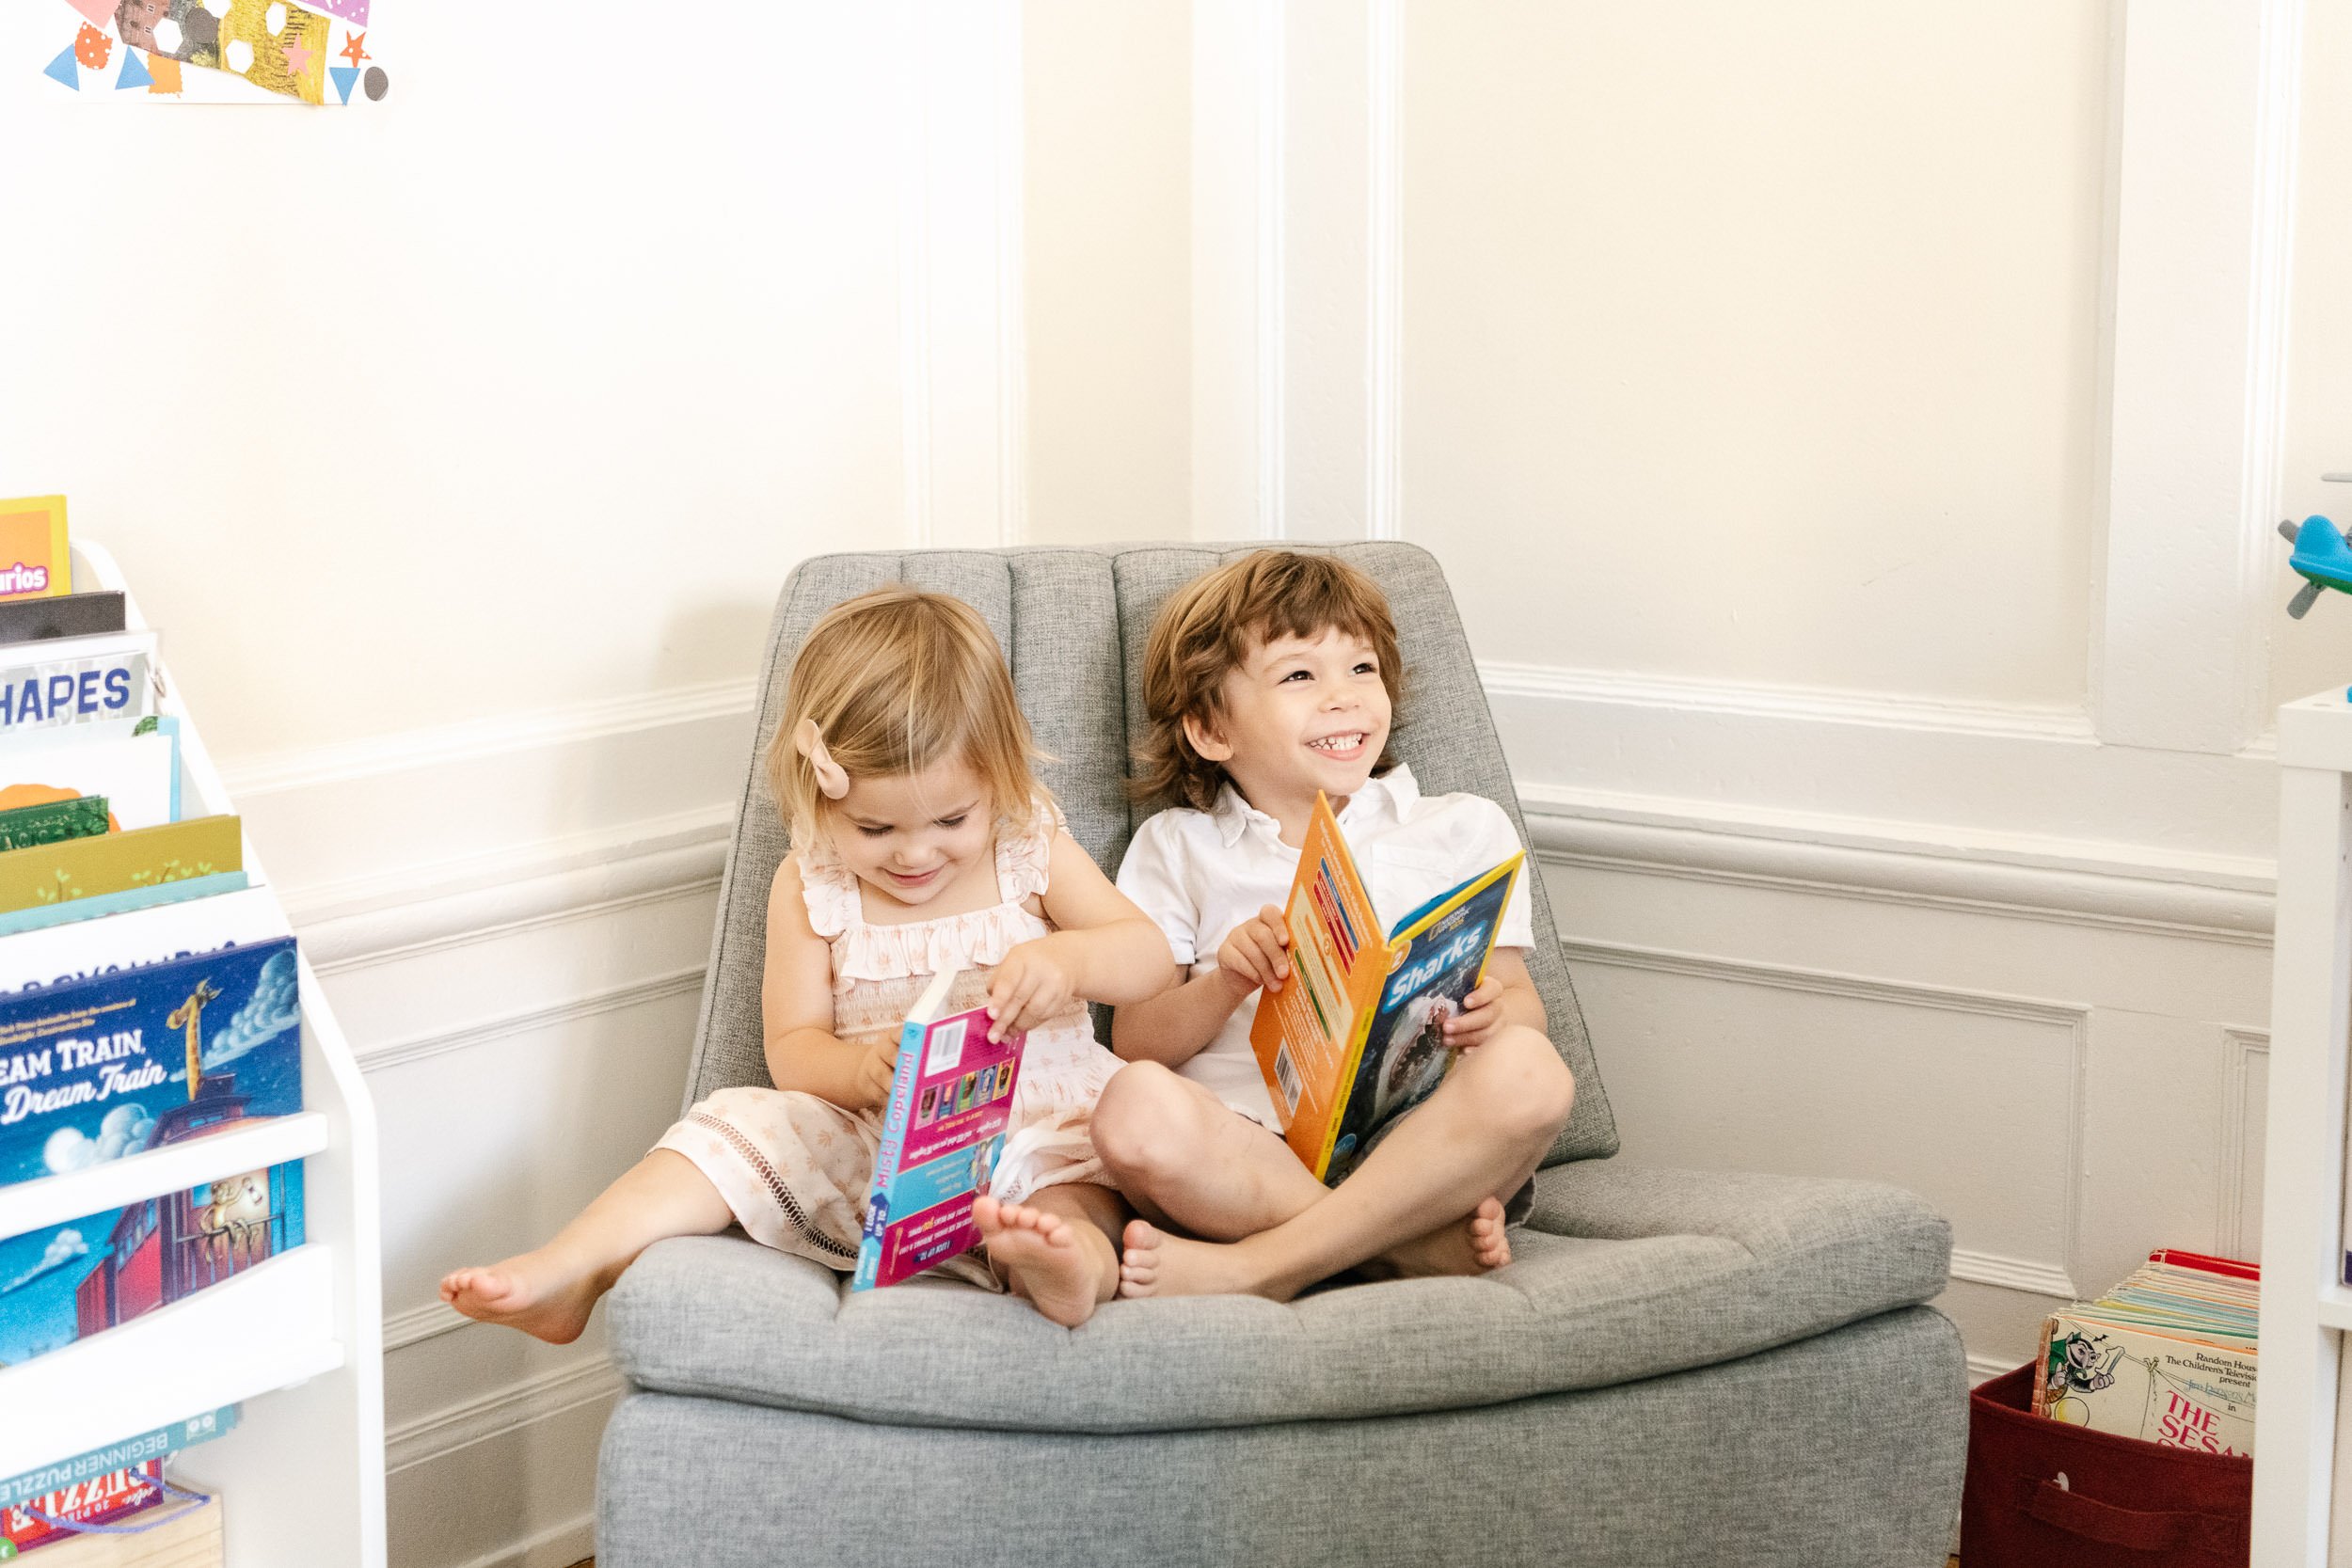  A brother and sister sit on a chair together and read stories by Nicole Hawkins Photography. brother and sister #NicoleHawkinsPhotograaphy #NicoleHawkinsChildren #NewYorkPortraits #KidsinNewYork #ChildrensPortraits #lifestyleportraits 